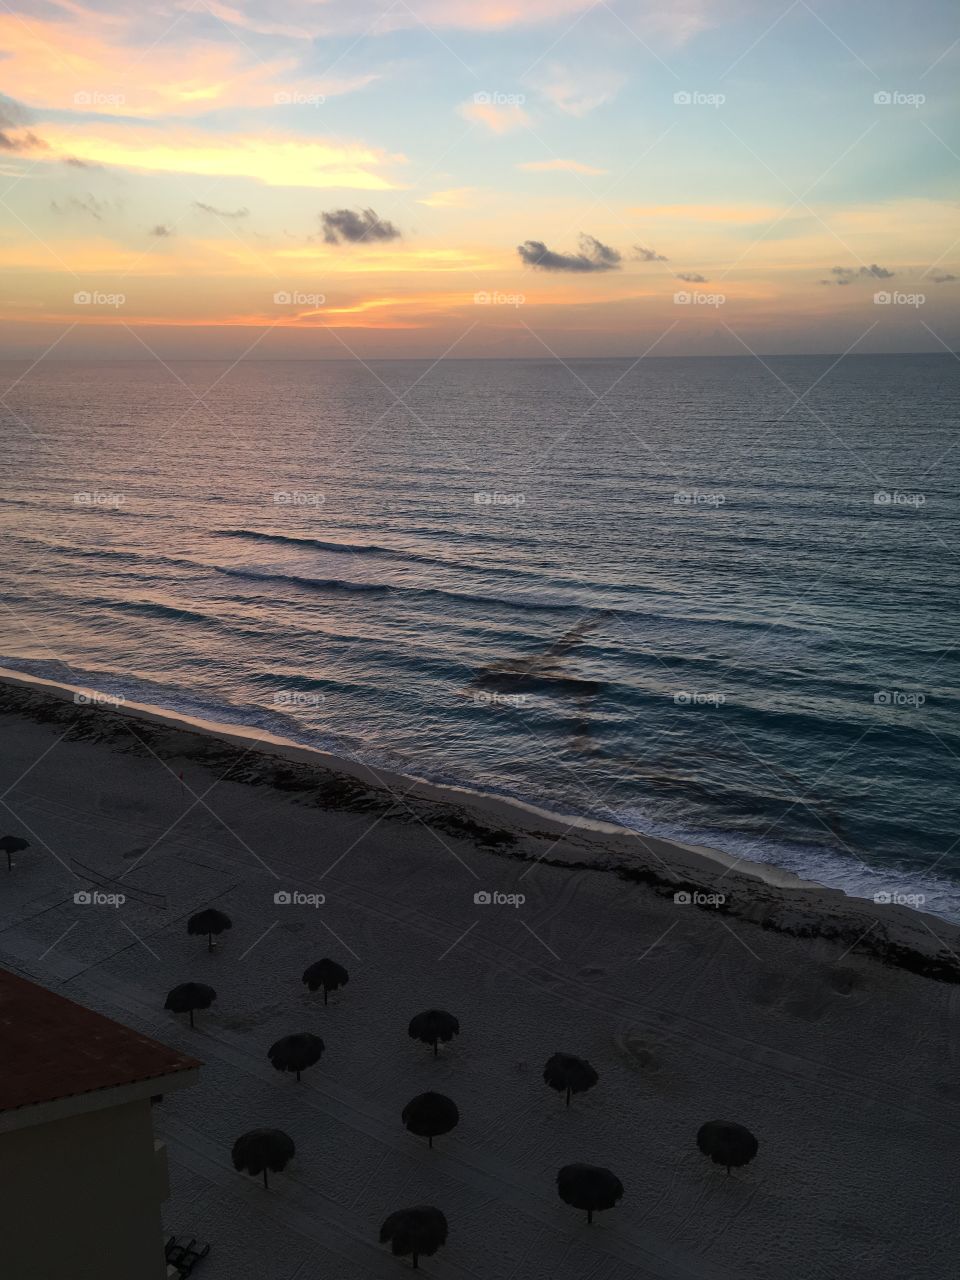 sunrise by the ocean 
cancun Mexico
